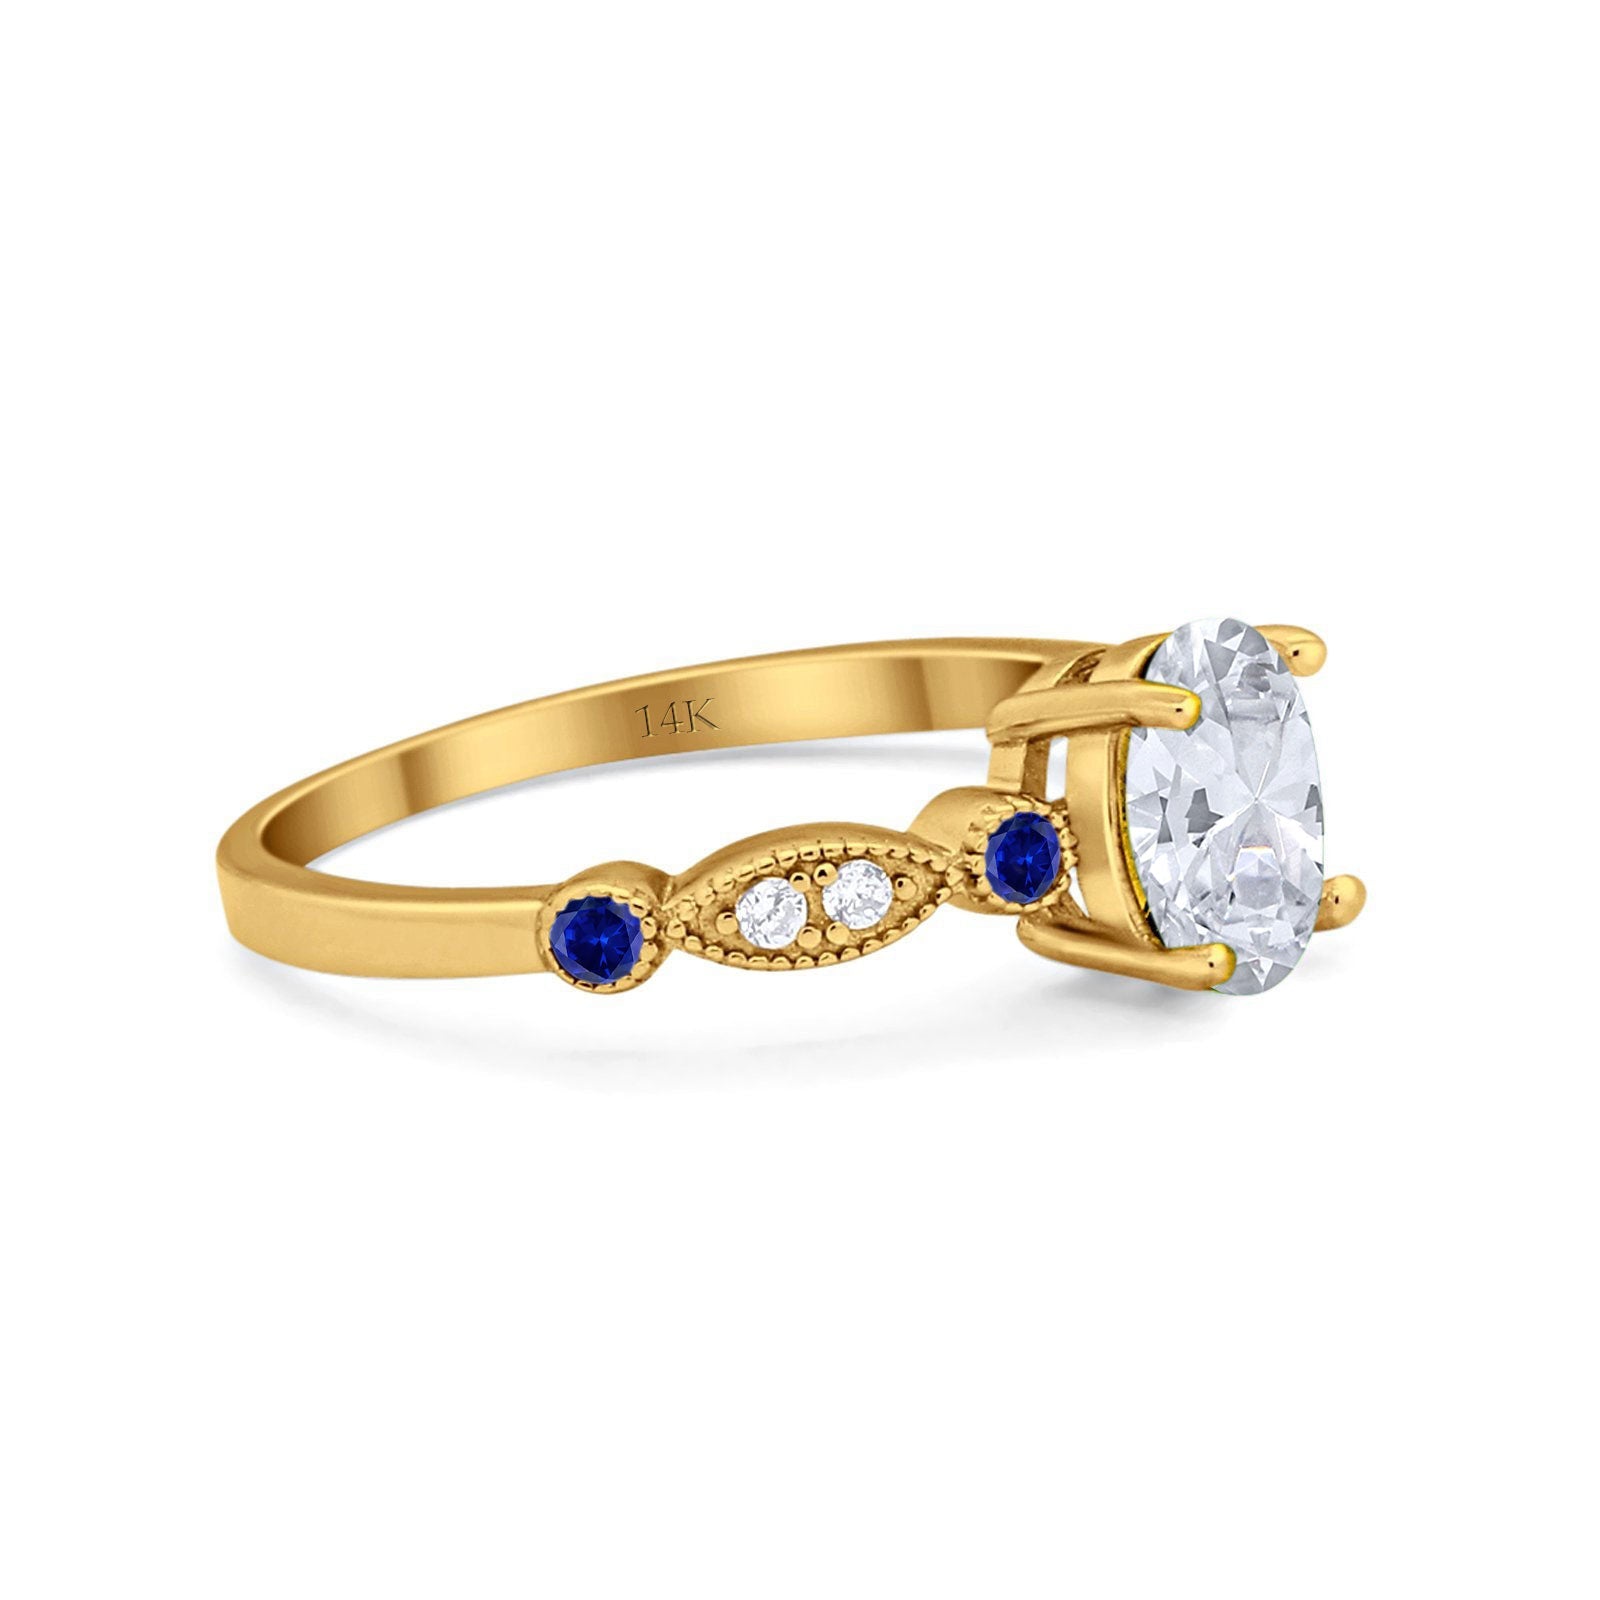 14K Gold Vintage Style Oval Shape Bridal Blue Sapphire Simulated Cubic Zirconia Wedding Engagement Ring